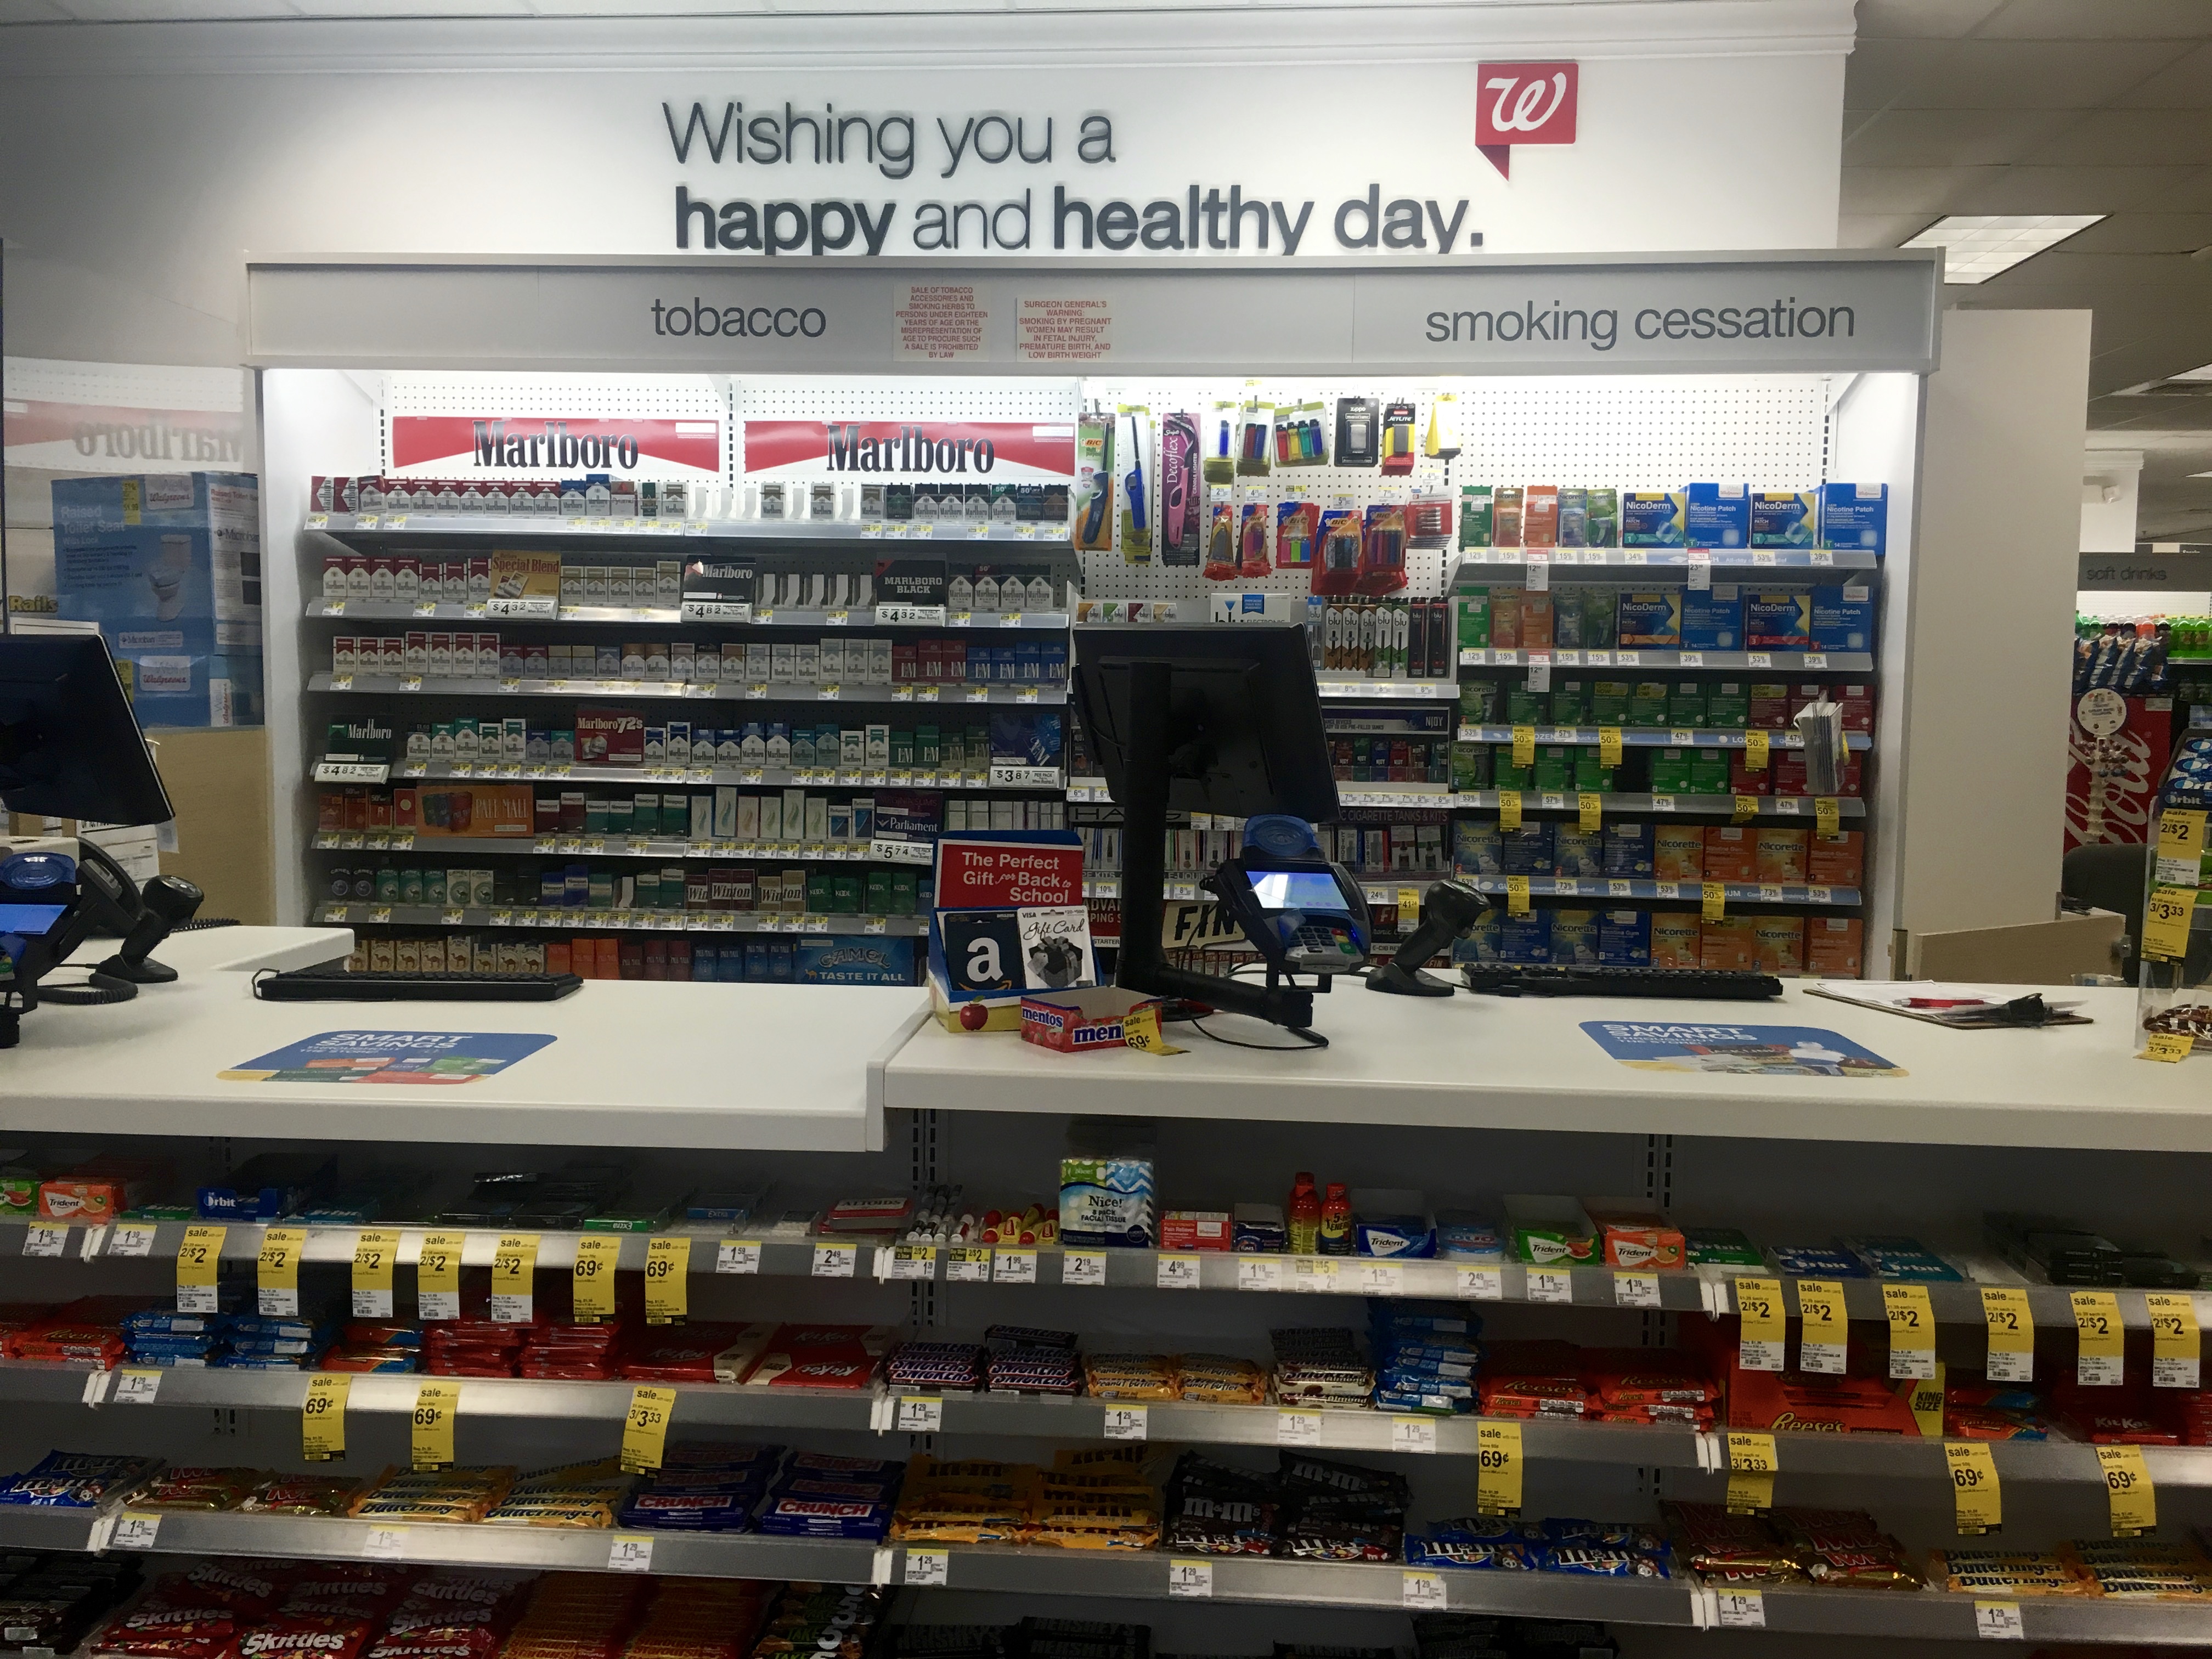 tobacco and cessation products side by side at Walgreens pharmacy